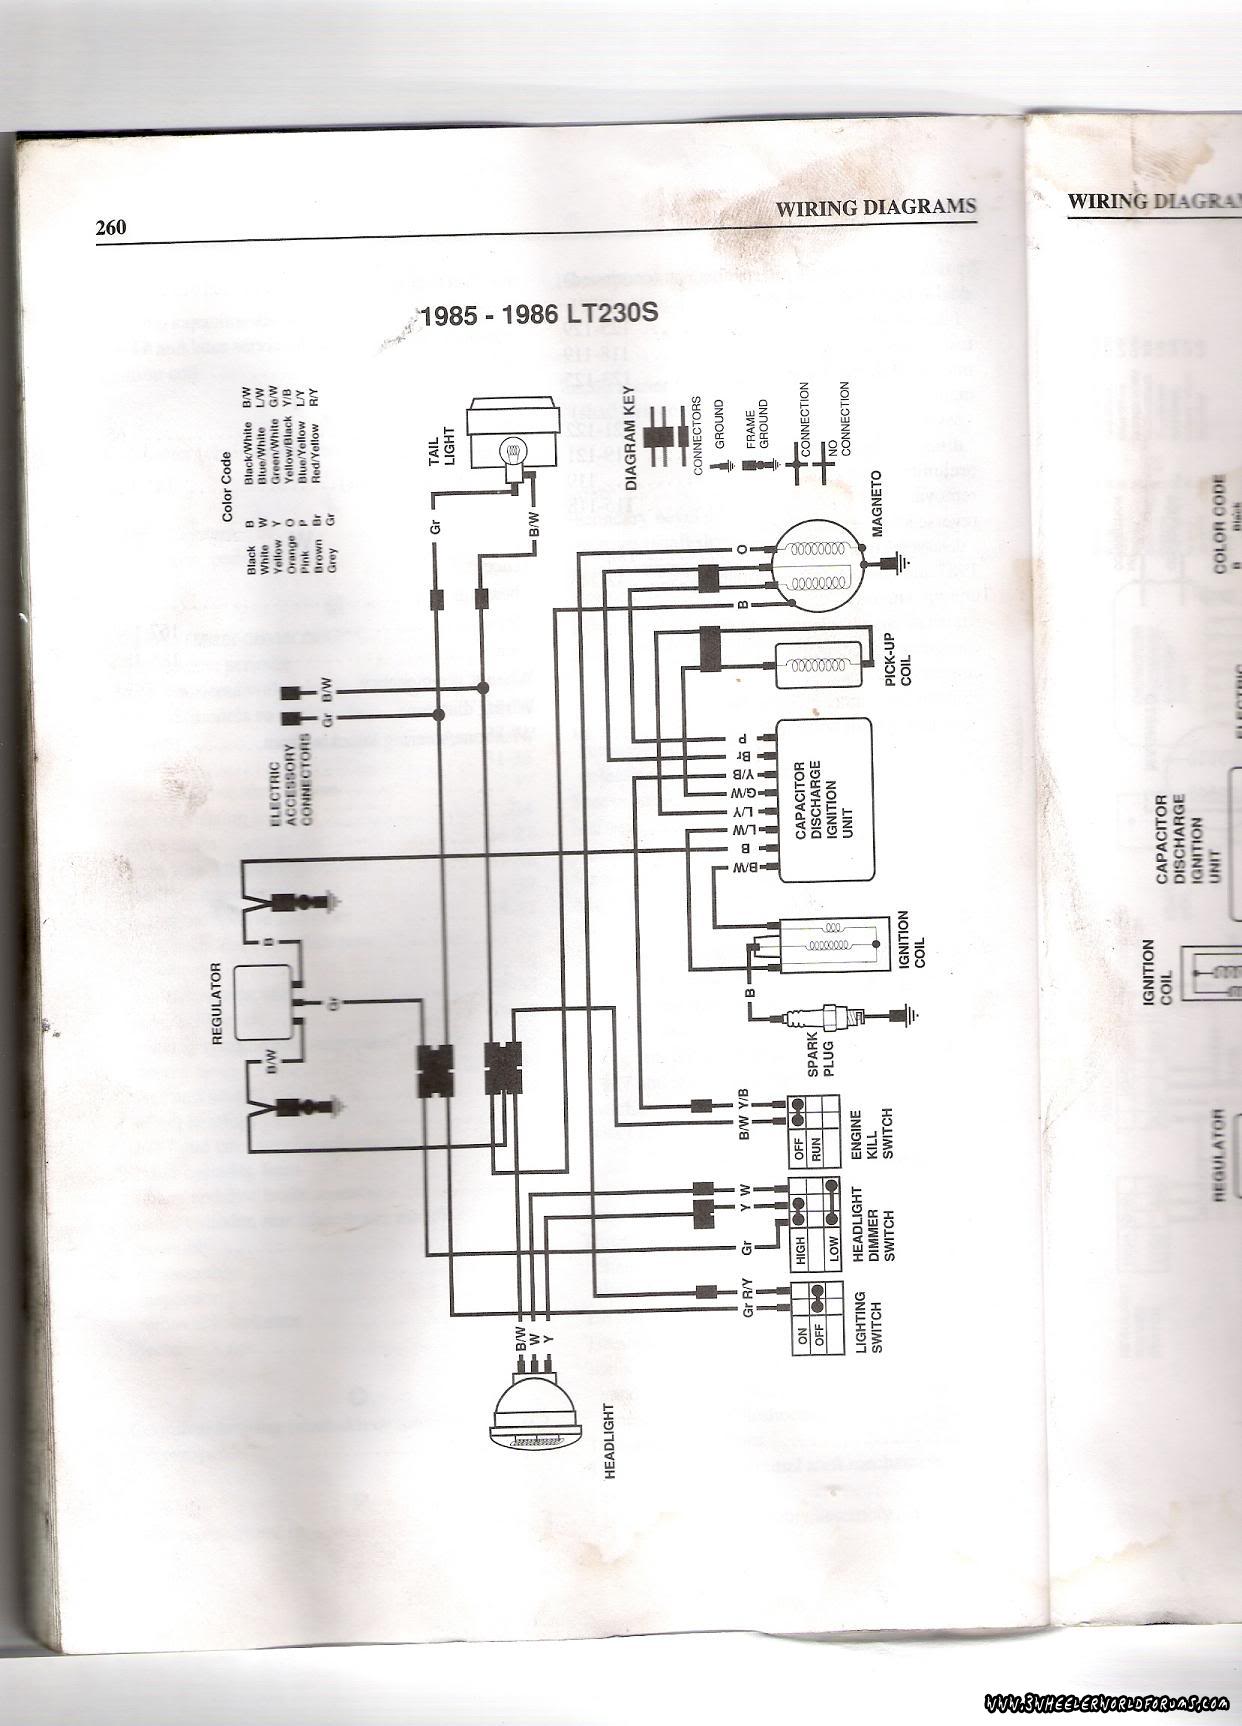 Wiring Diagram For Suzuki 2007 C90 Fuel Pump from atvconnection.com